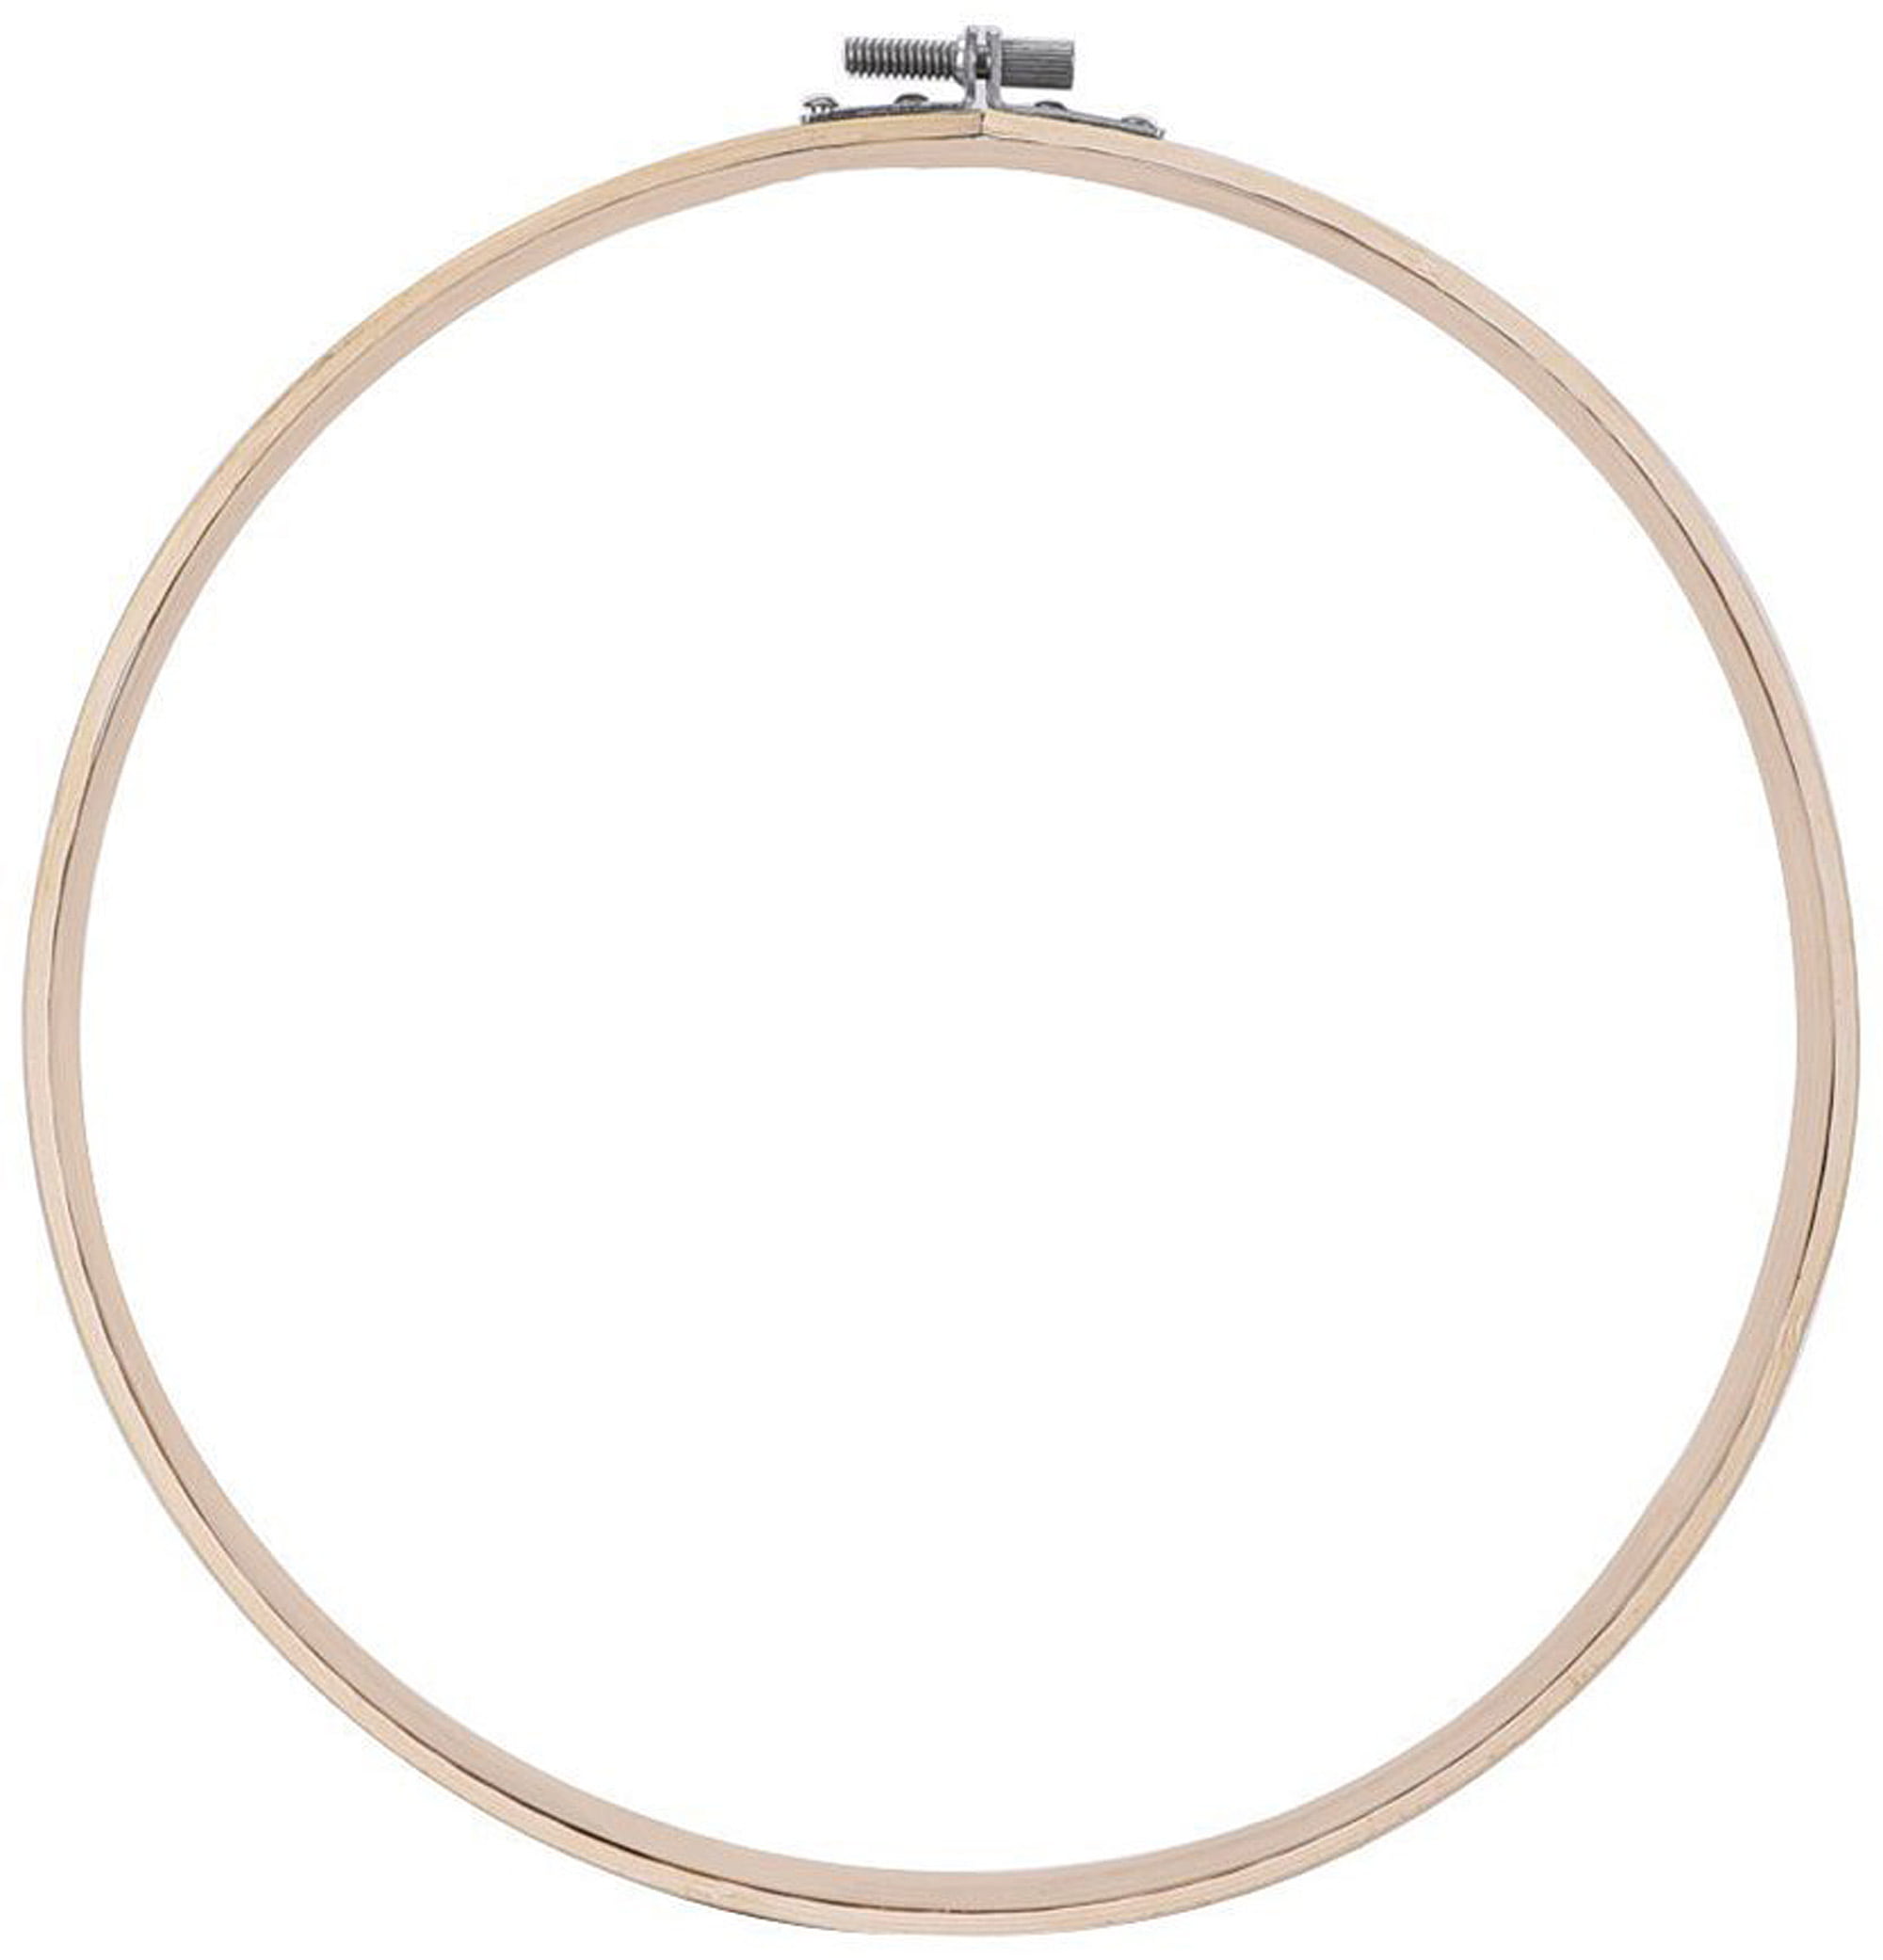 3 Pieces Embroidery Hoops Bamboo Circle Cross Stitch Hoop Ring Set for Art X8P8